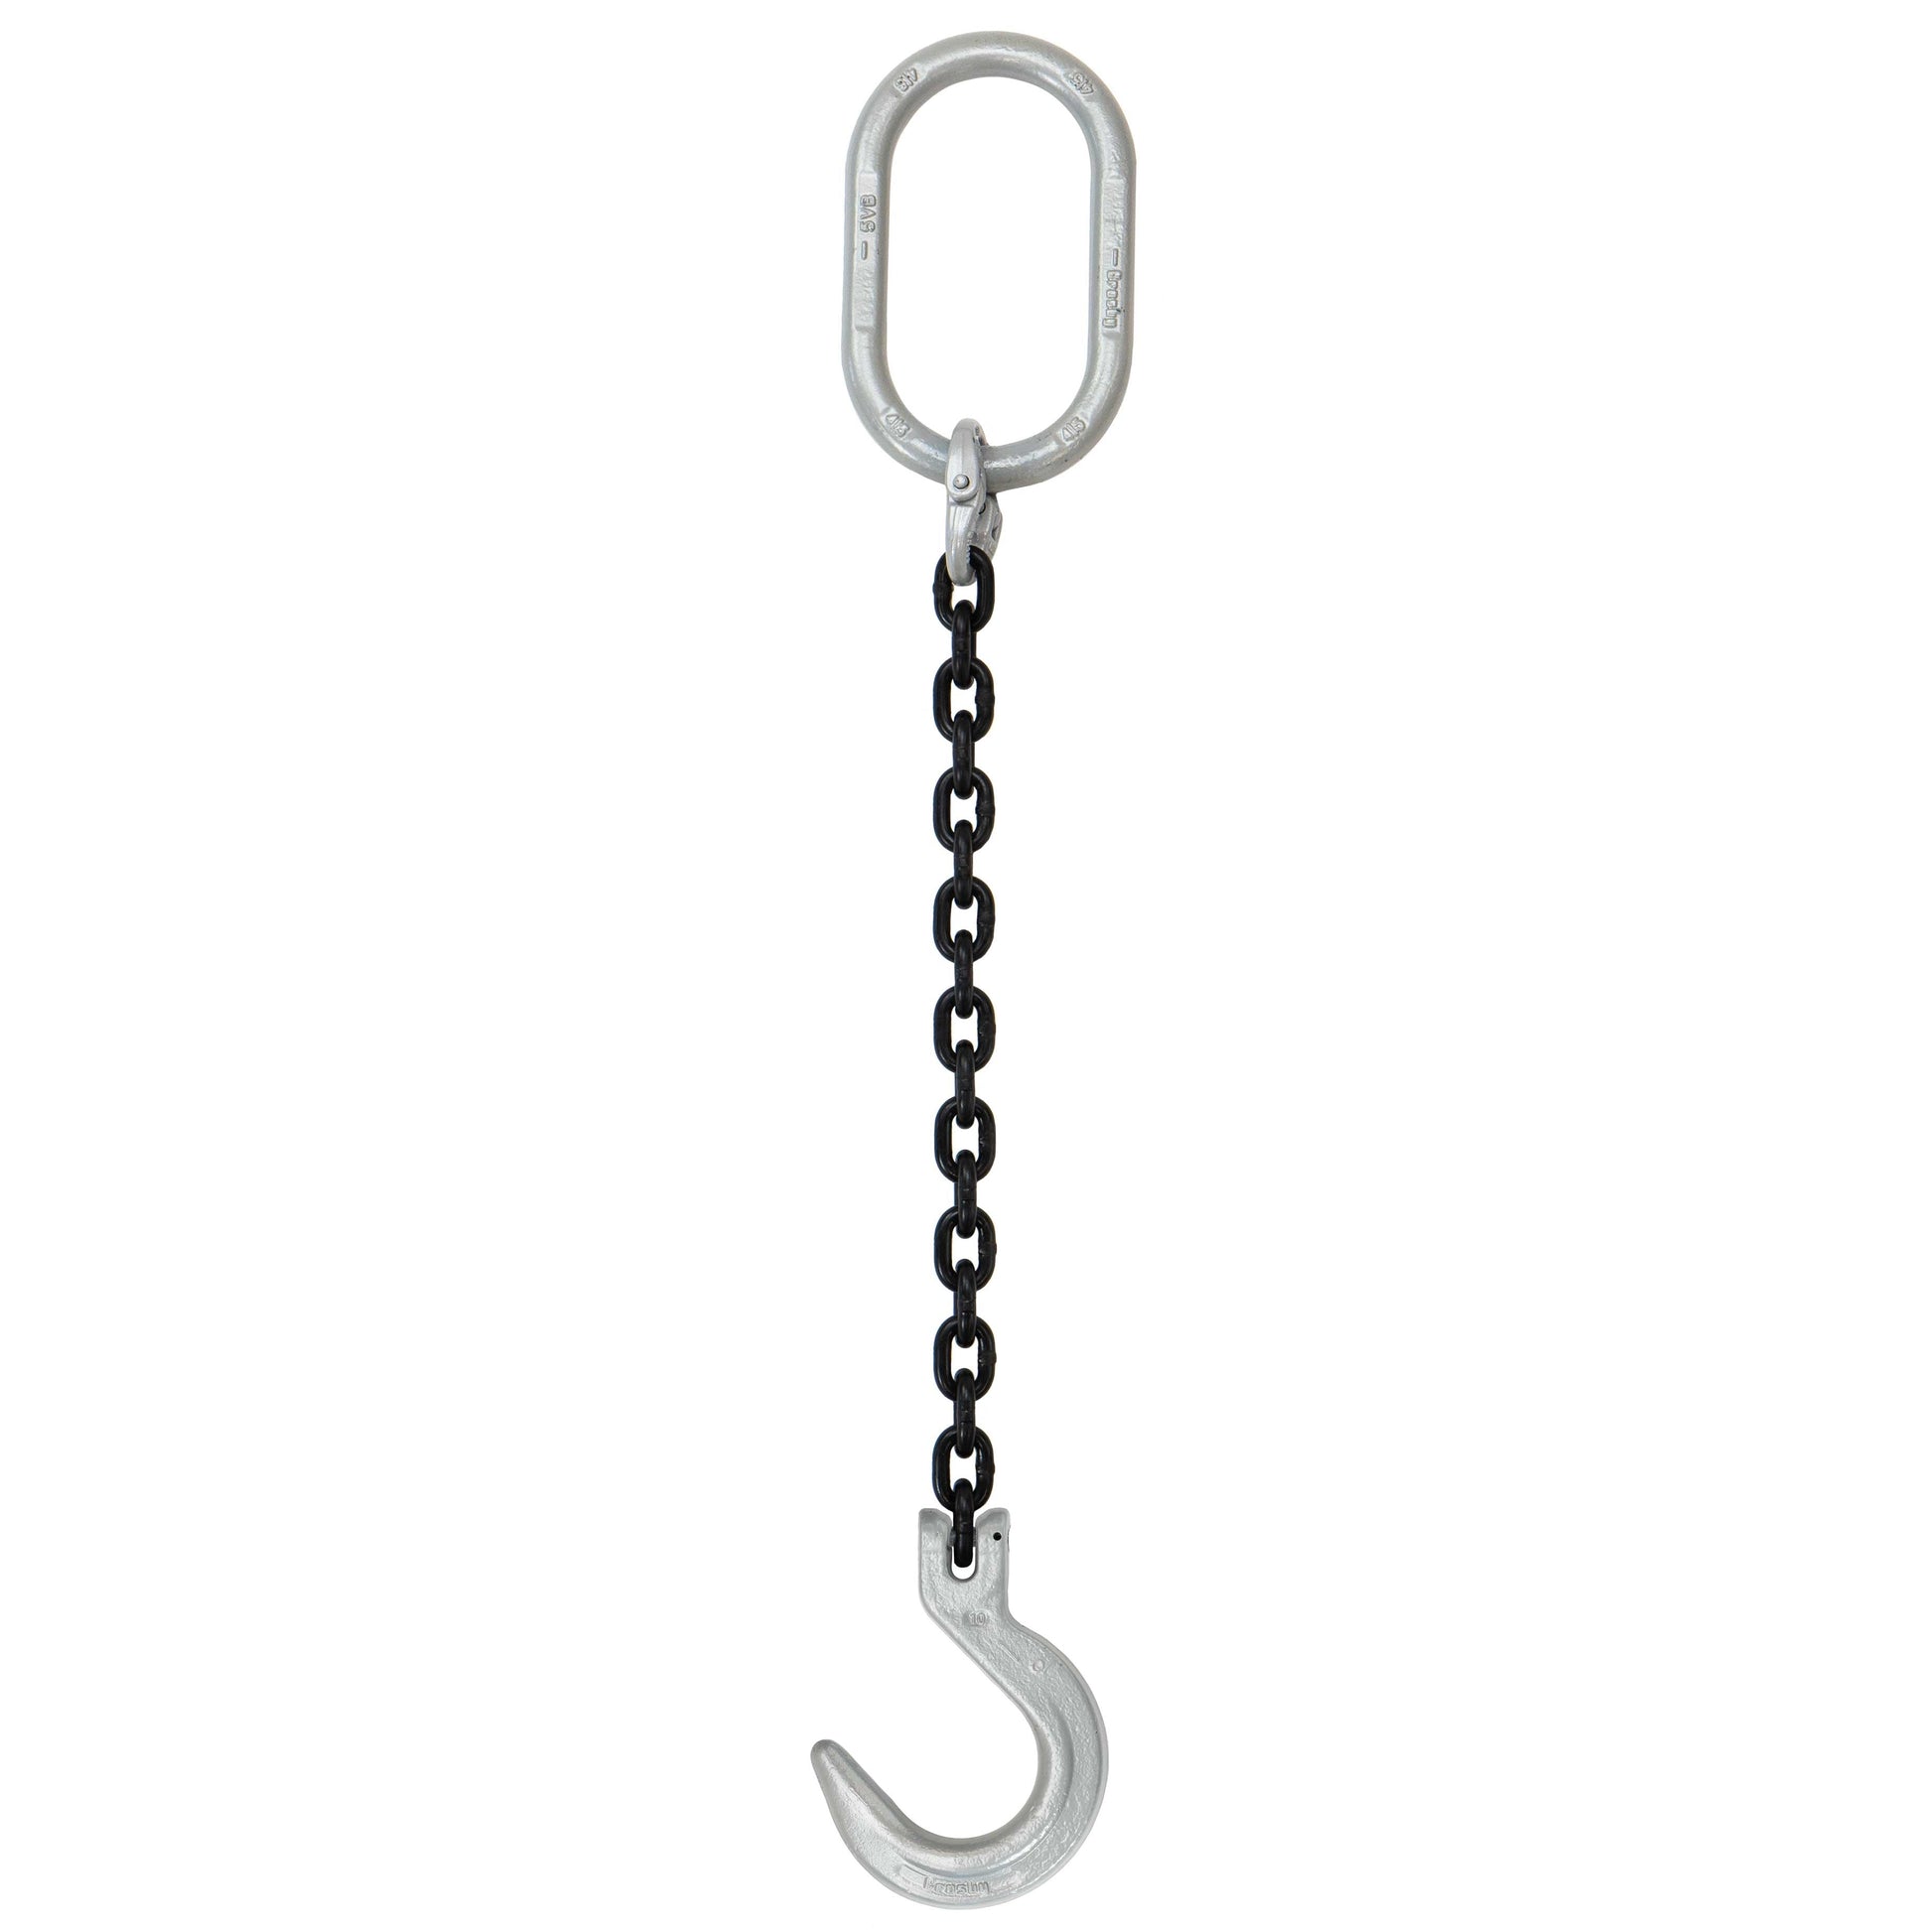 38 inch x 20 foot Domestic Single Leg Chain Sling w Crosby Foundry Hook Grade 100 image 1 of 2